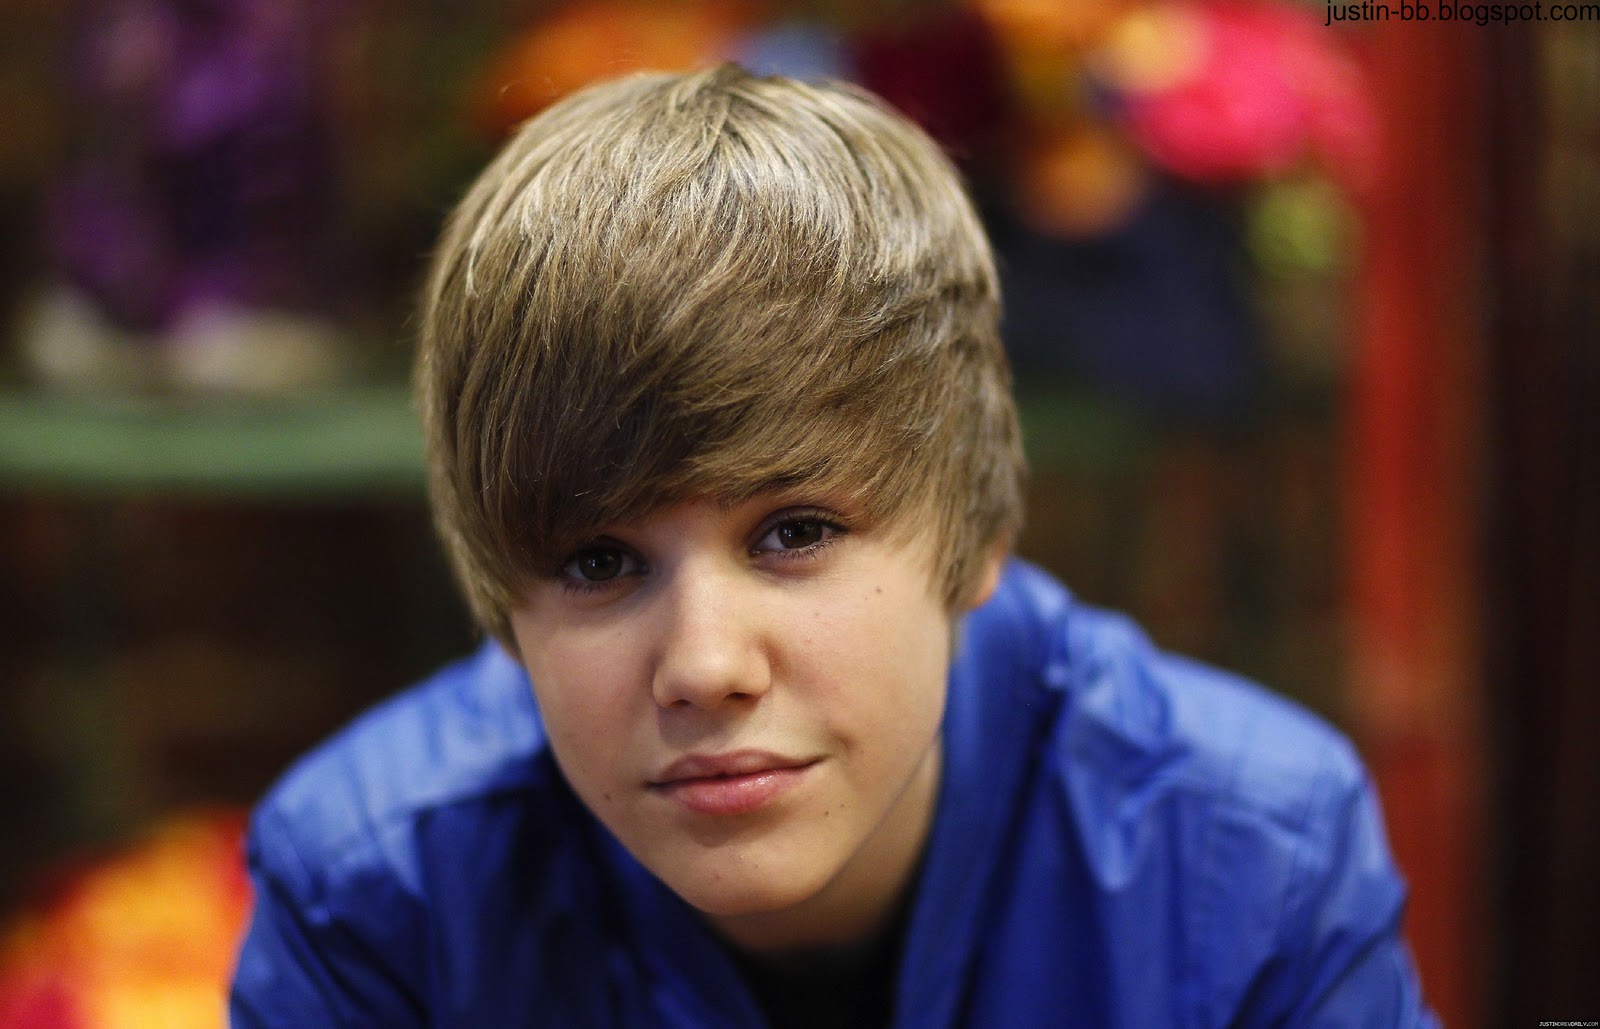 ALL ABOUT HOLLYWOOD STARS: Justin Bieber Profile And Pics